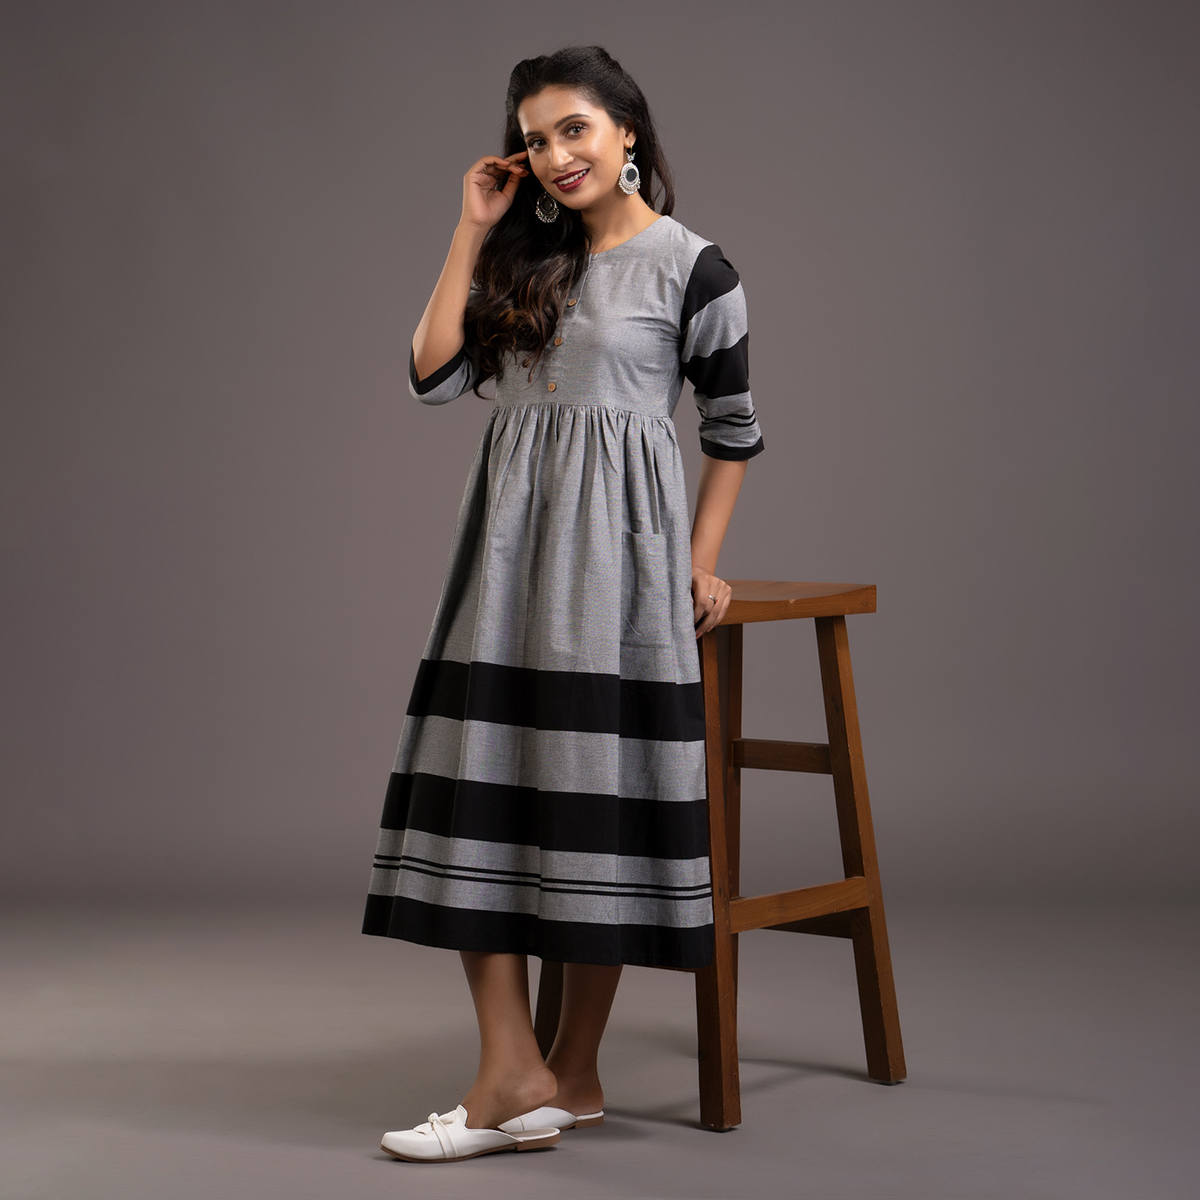 Zella Solid Color Border Detailed South Cotton Midi Dress with front Patch pocket styling - Ash